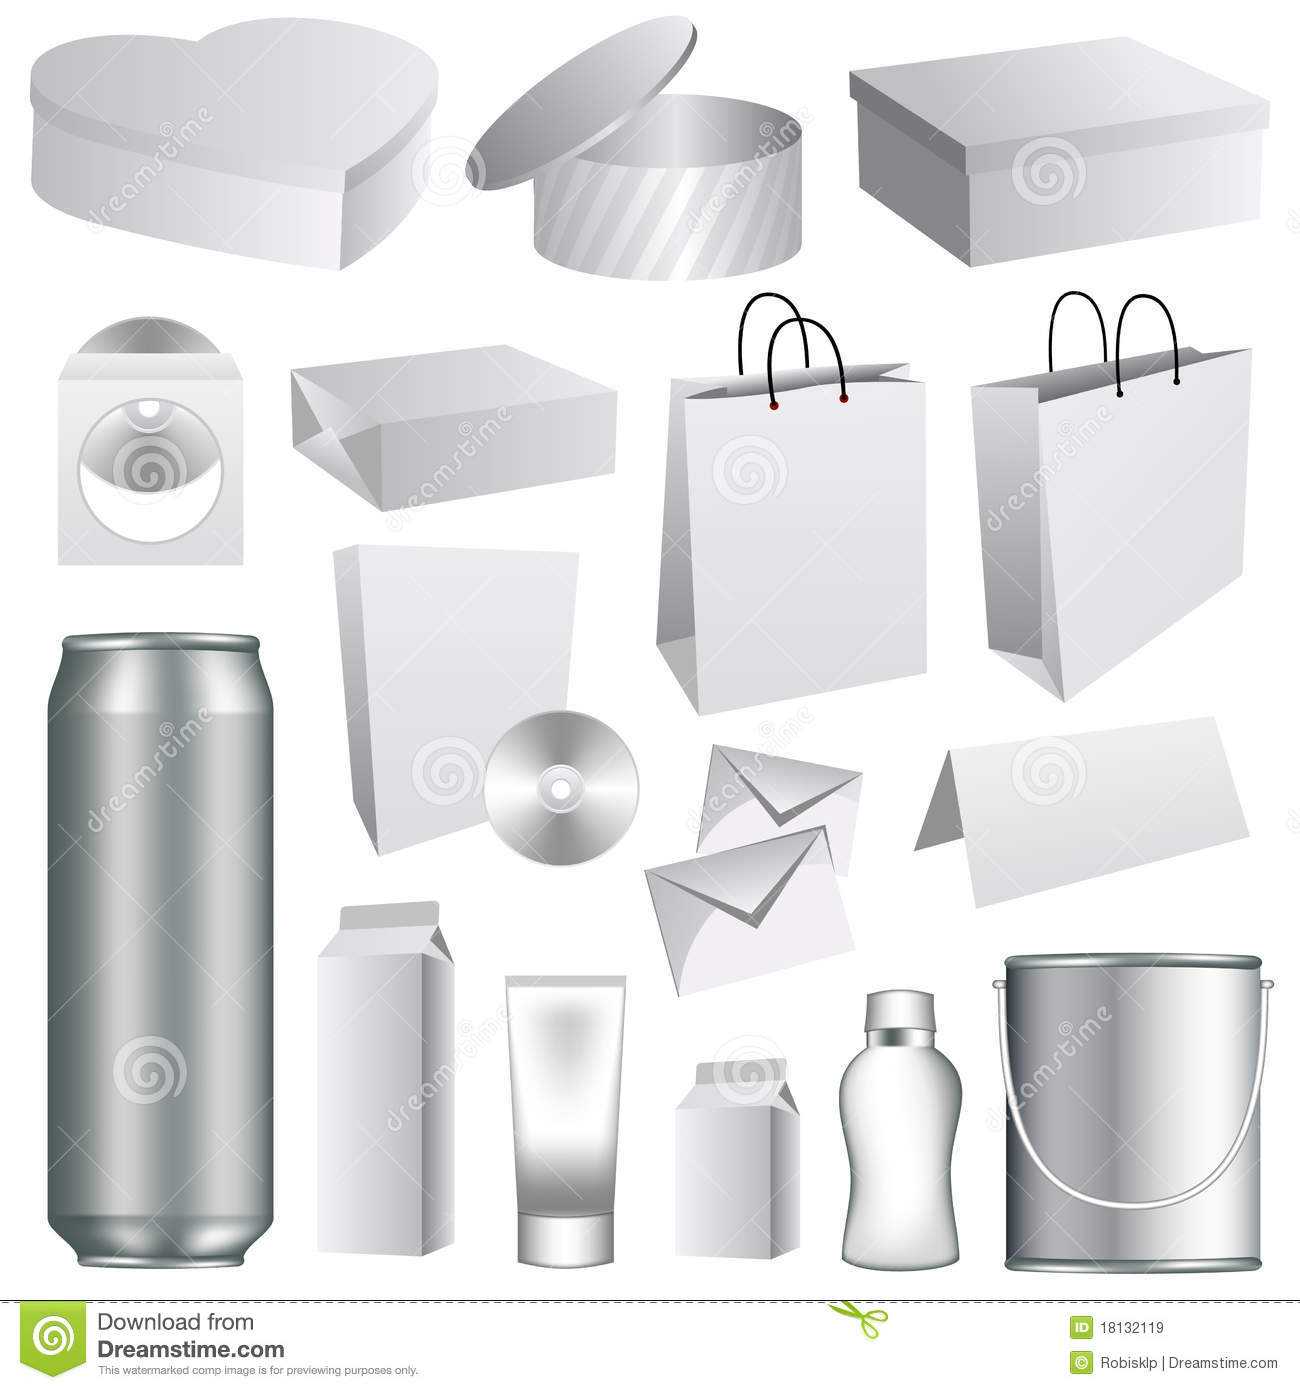 Blank Packaging Templates Stock Vector. Illustration Of Pertaining To Blank Packaging Templates